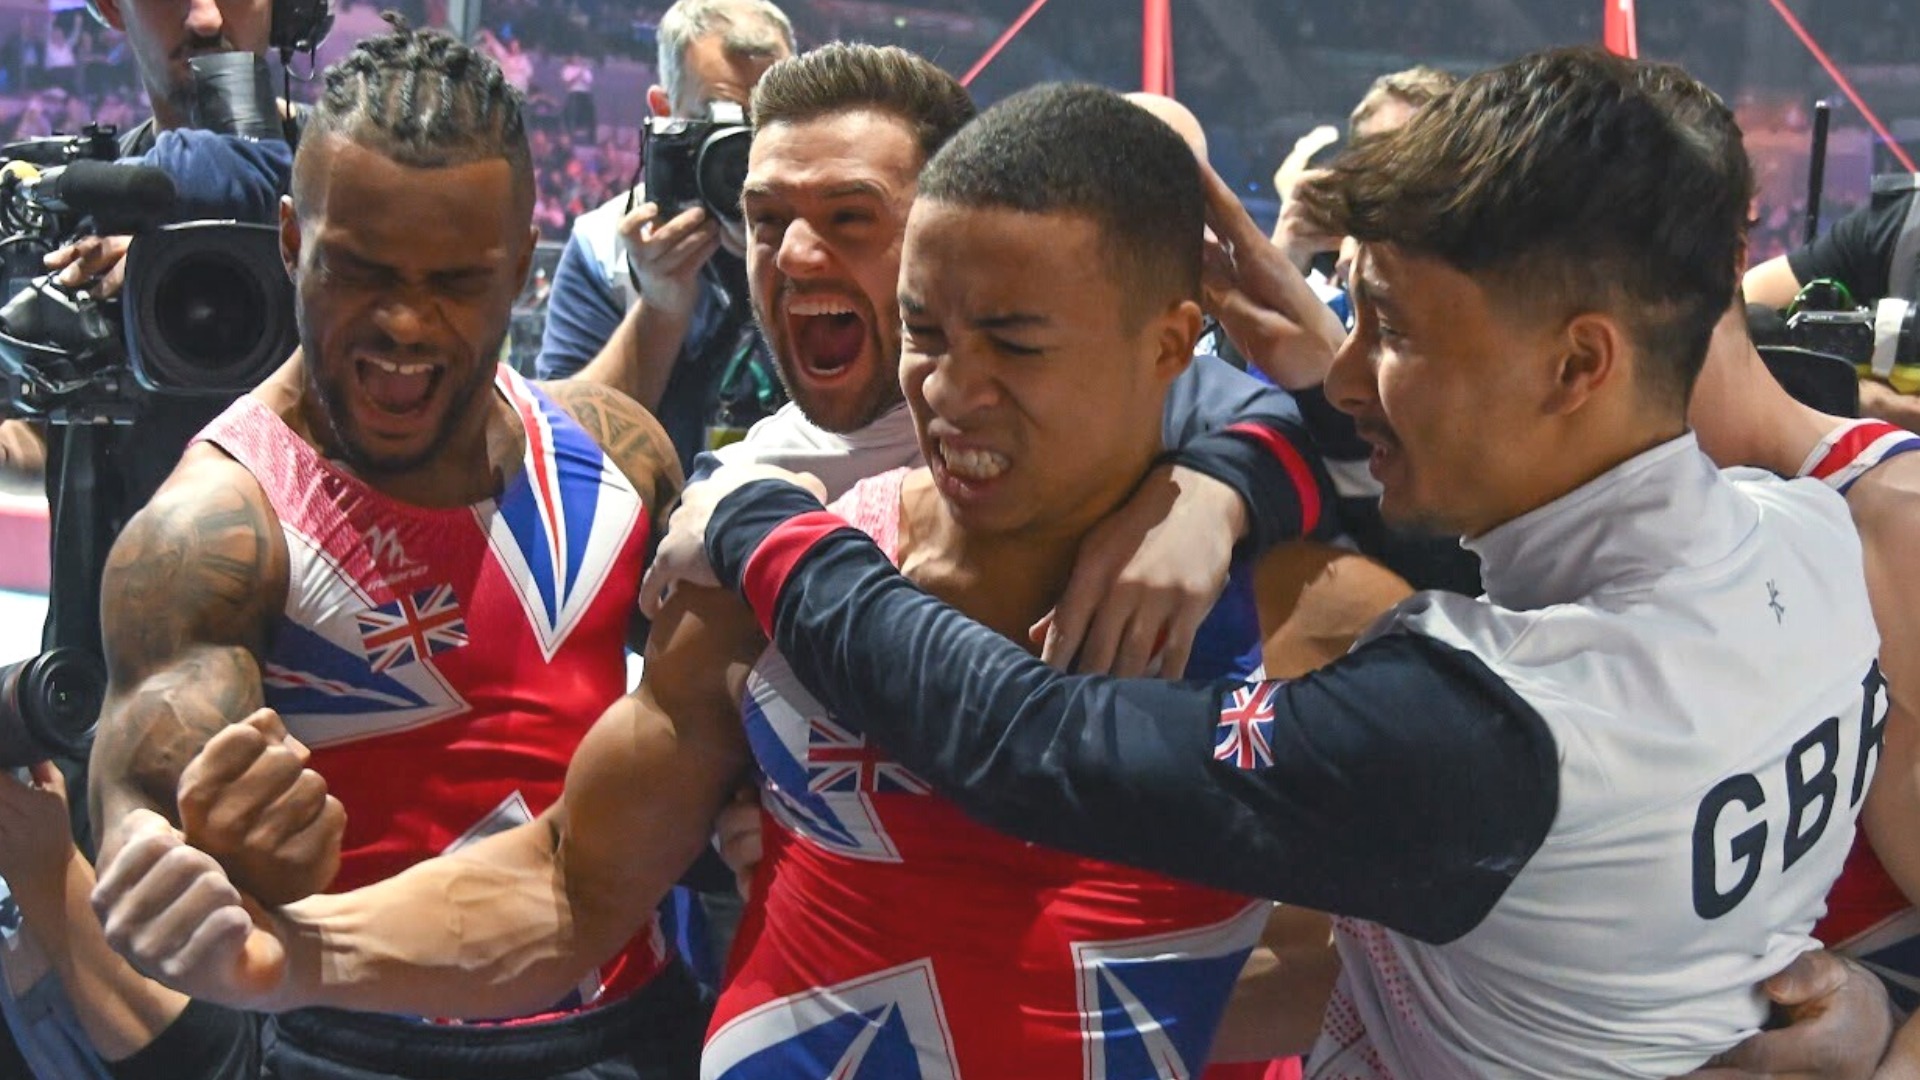 The men of Team Great Britain react after winning bronze in the men's team final at the 2022 World Gymnastics Championships.